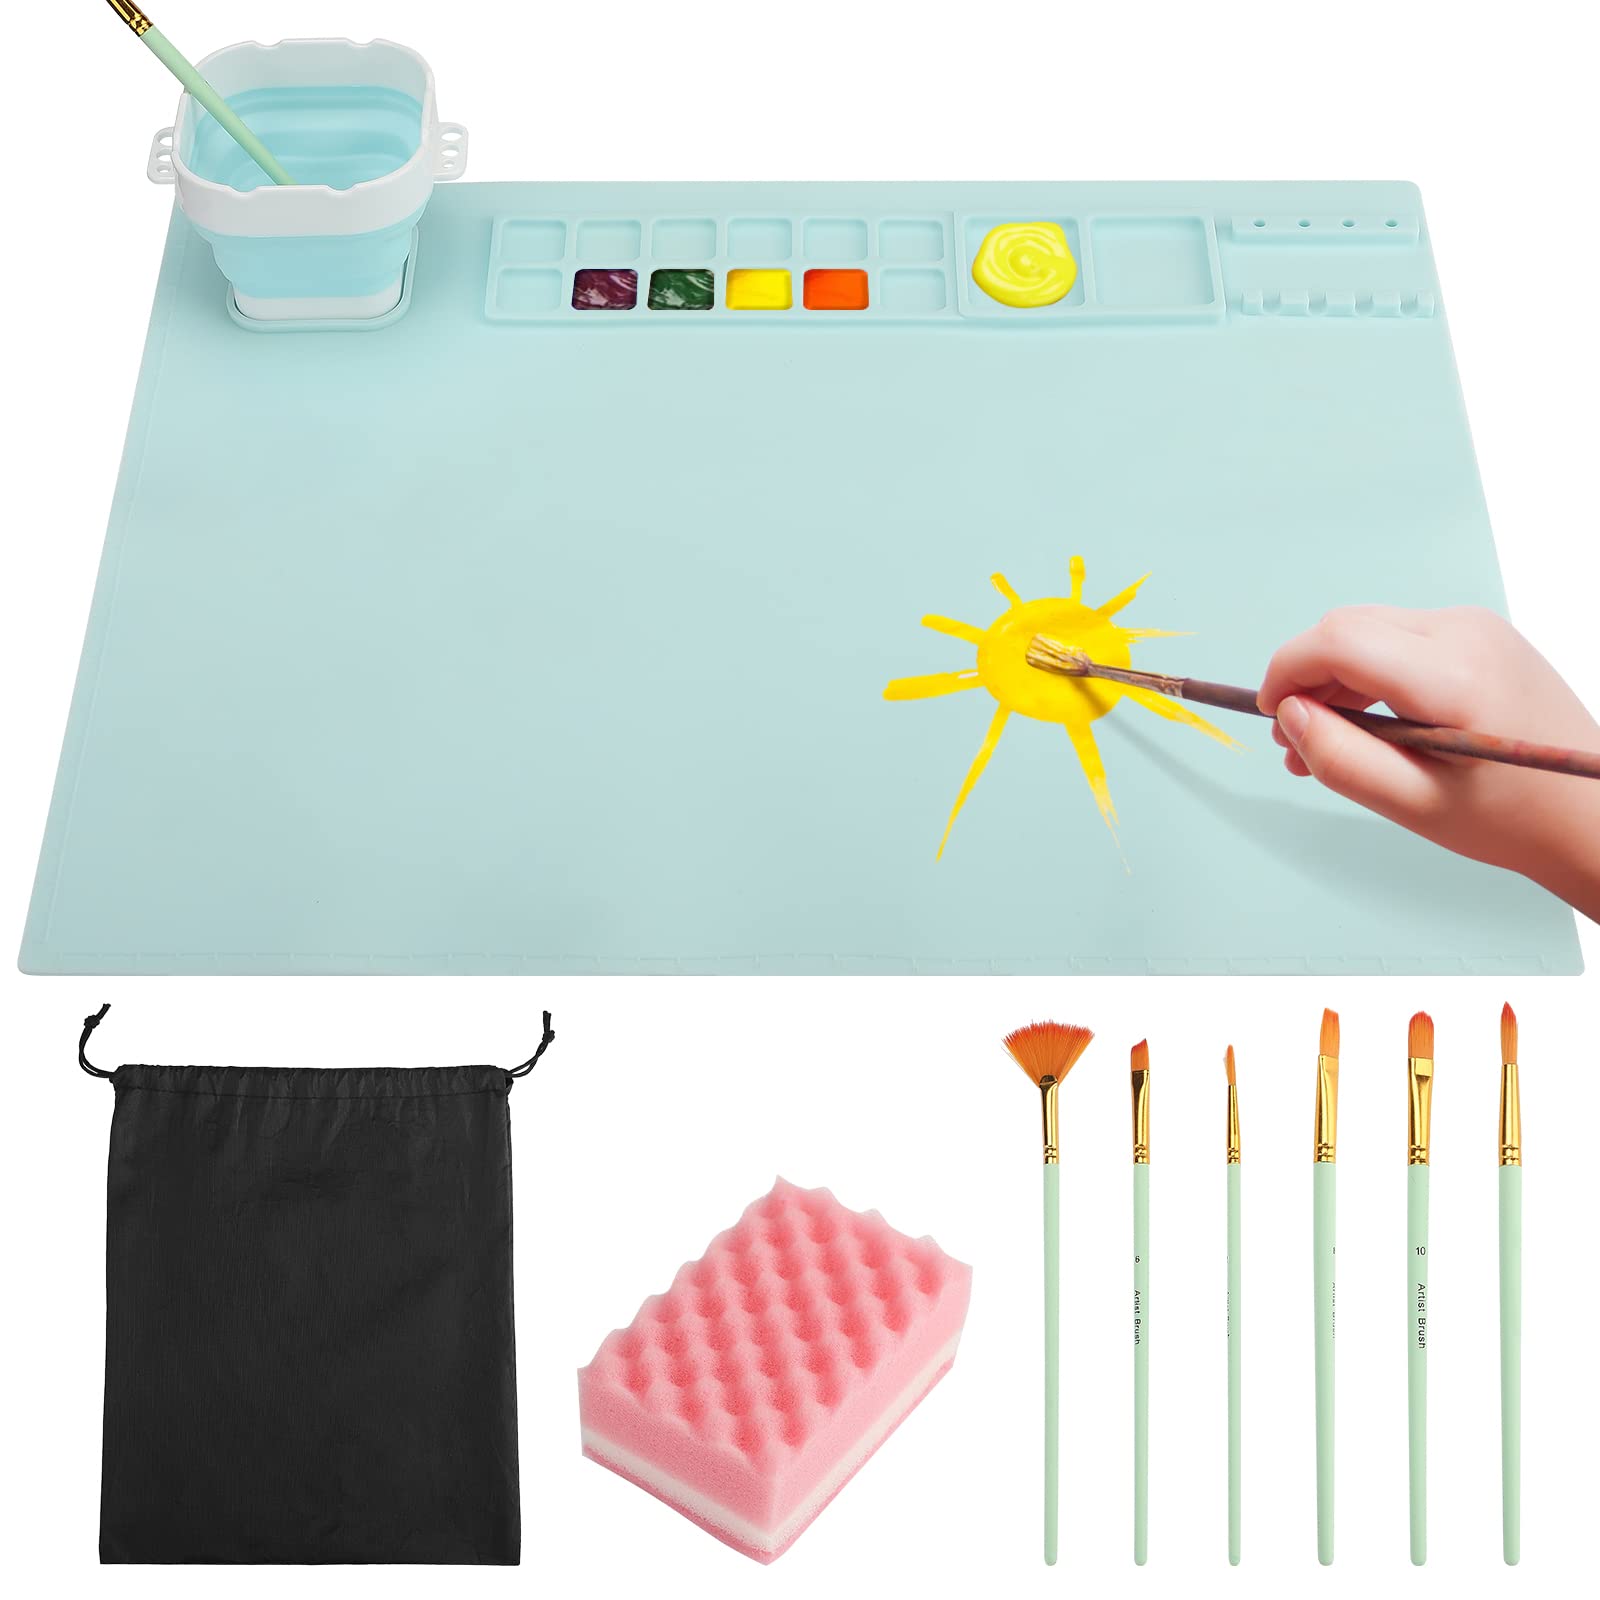 Atrusu Silicone Craft Mat Silicone Mats for Crafts 20X16 Inch Nonstick Silicone  Artist Mat with Cup